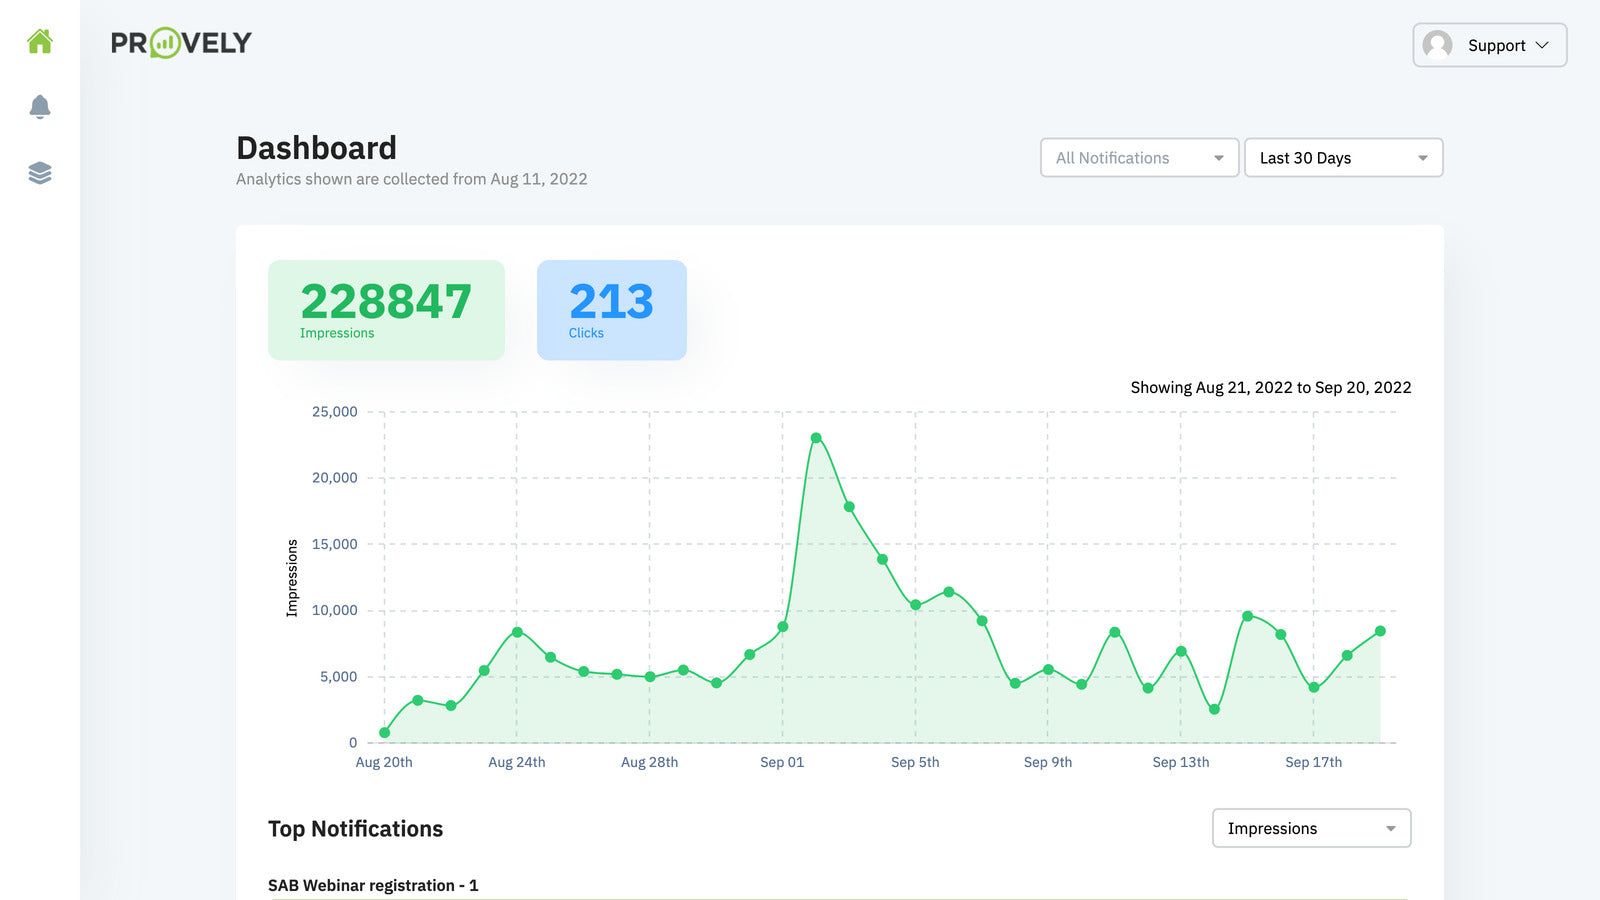 Built-In Analytics - Keep track of your impressions and clicks